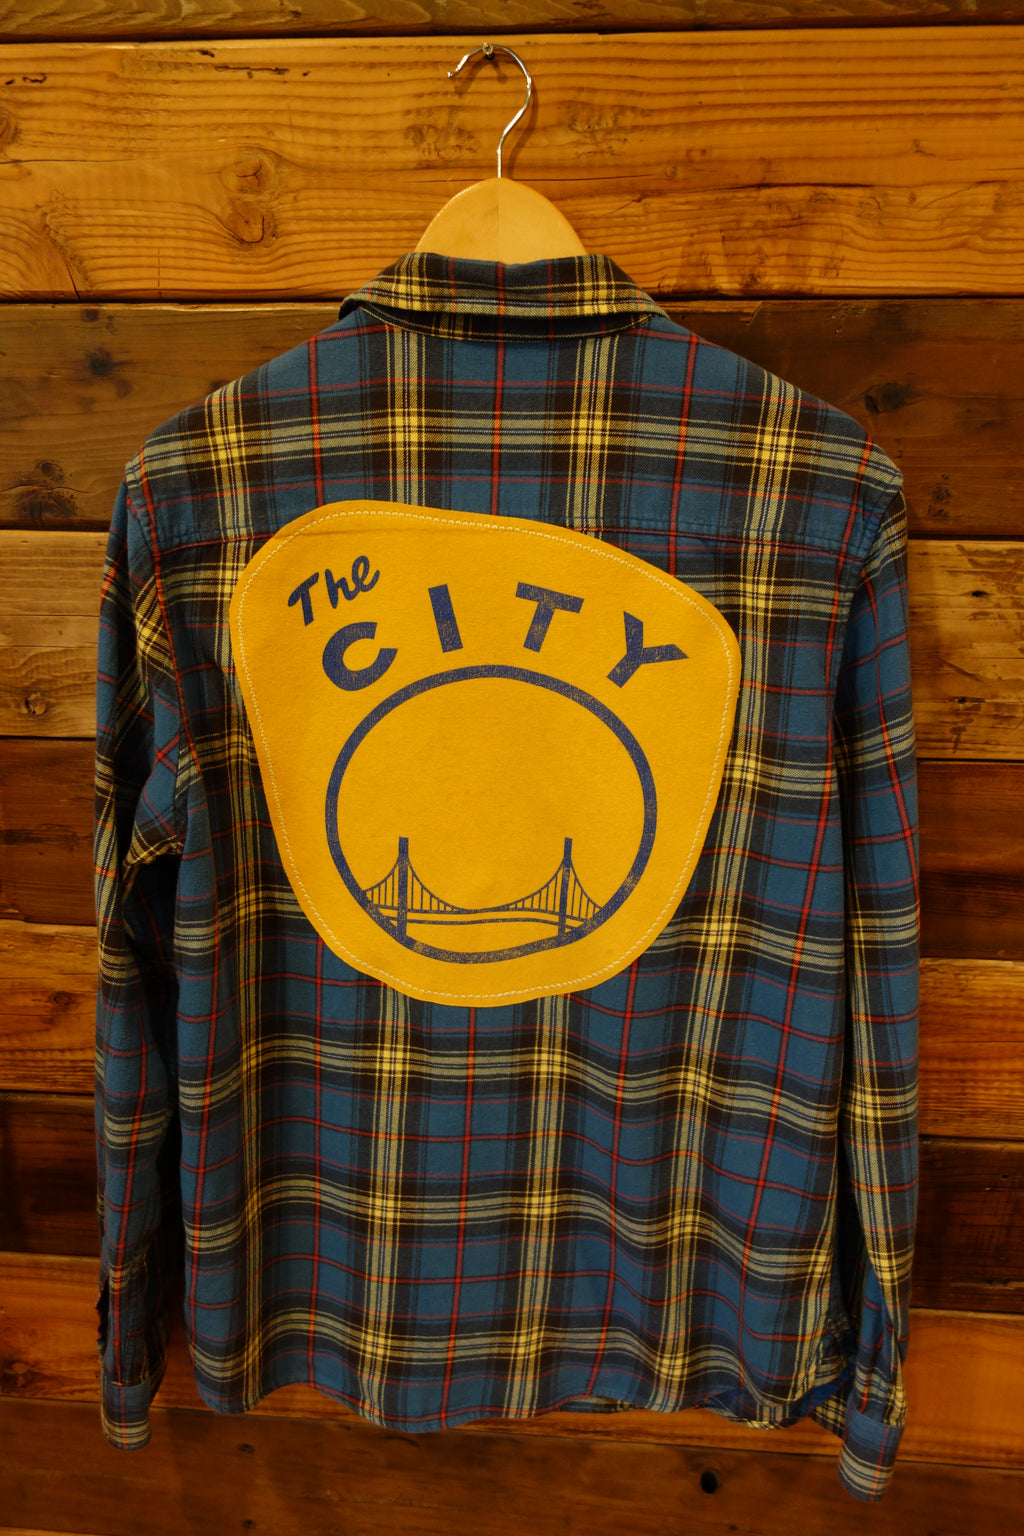 Classic Soft Tee Vintage Flannel, Golden State Warriors, The City